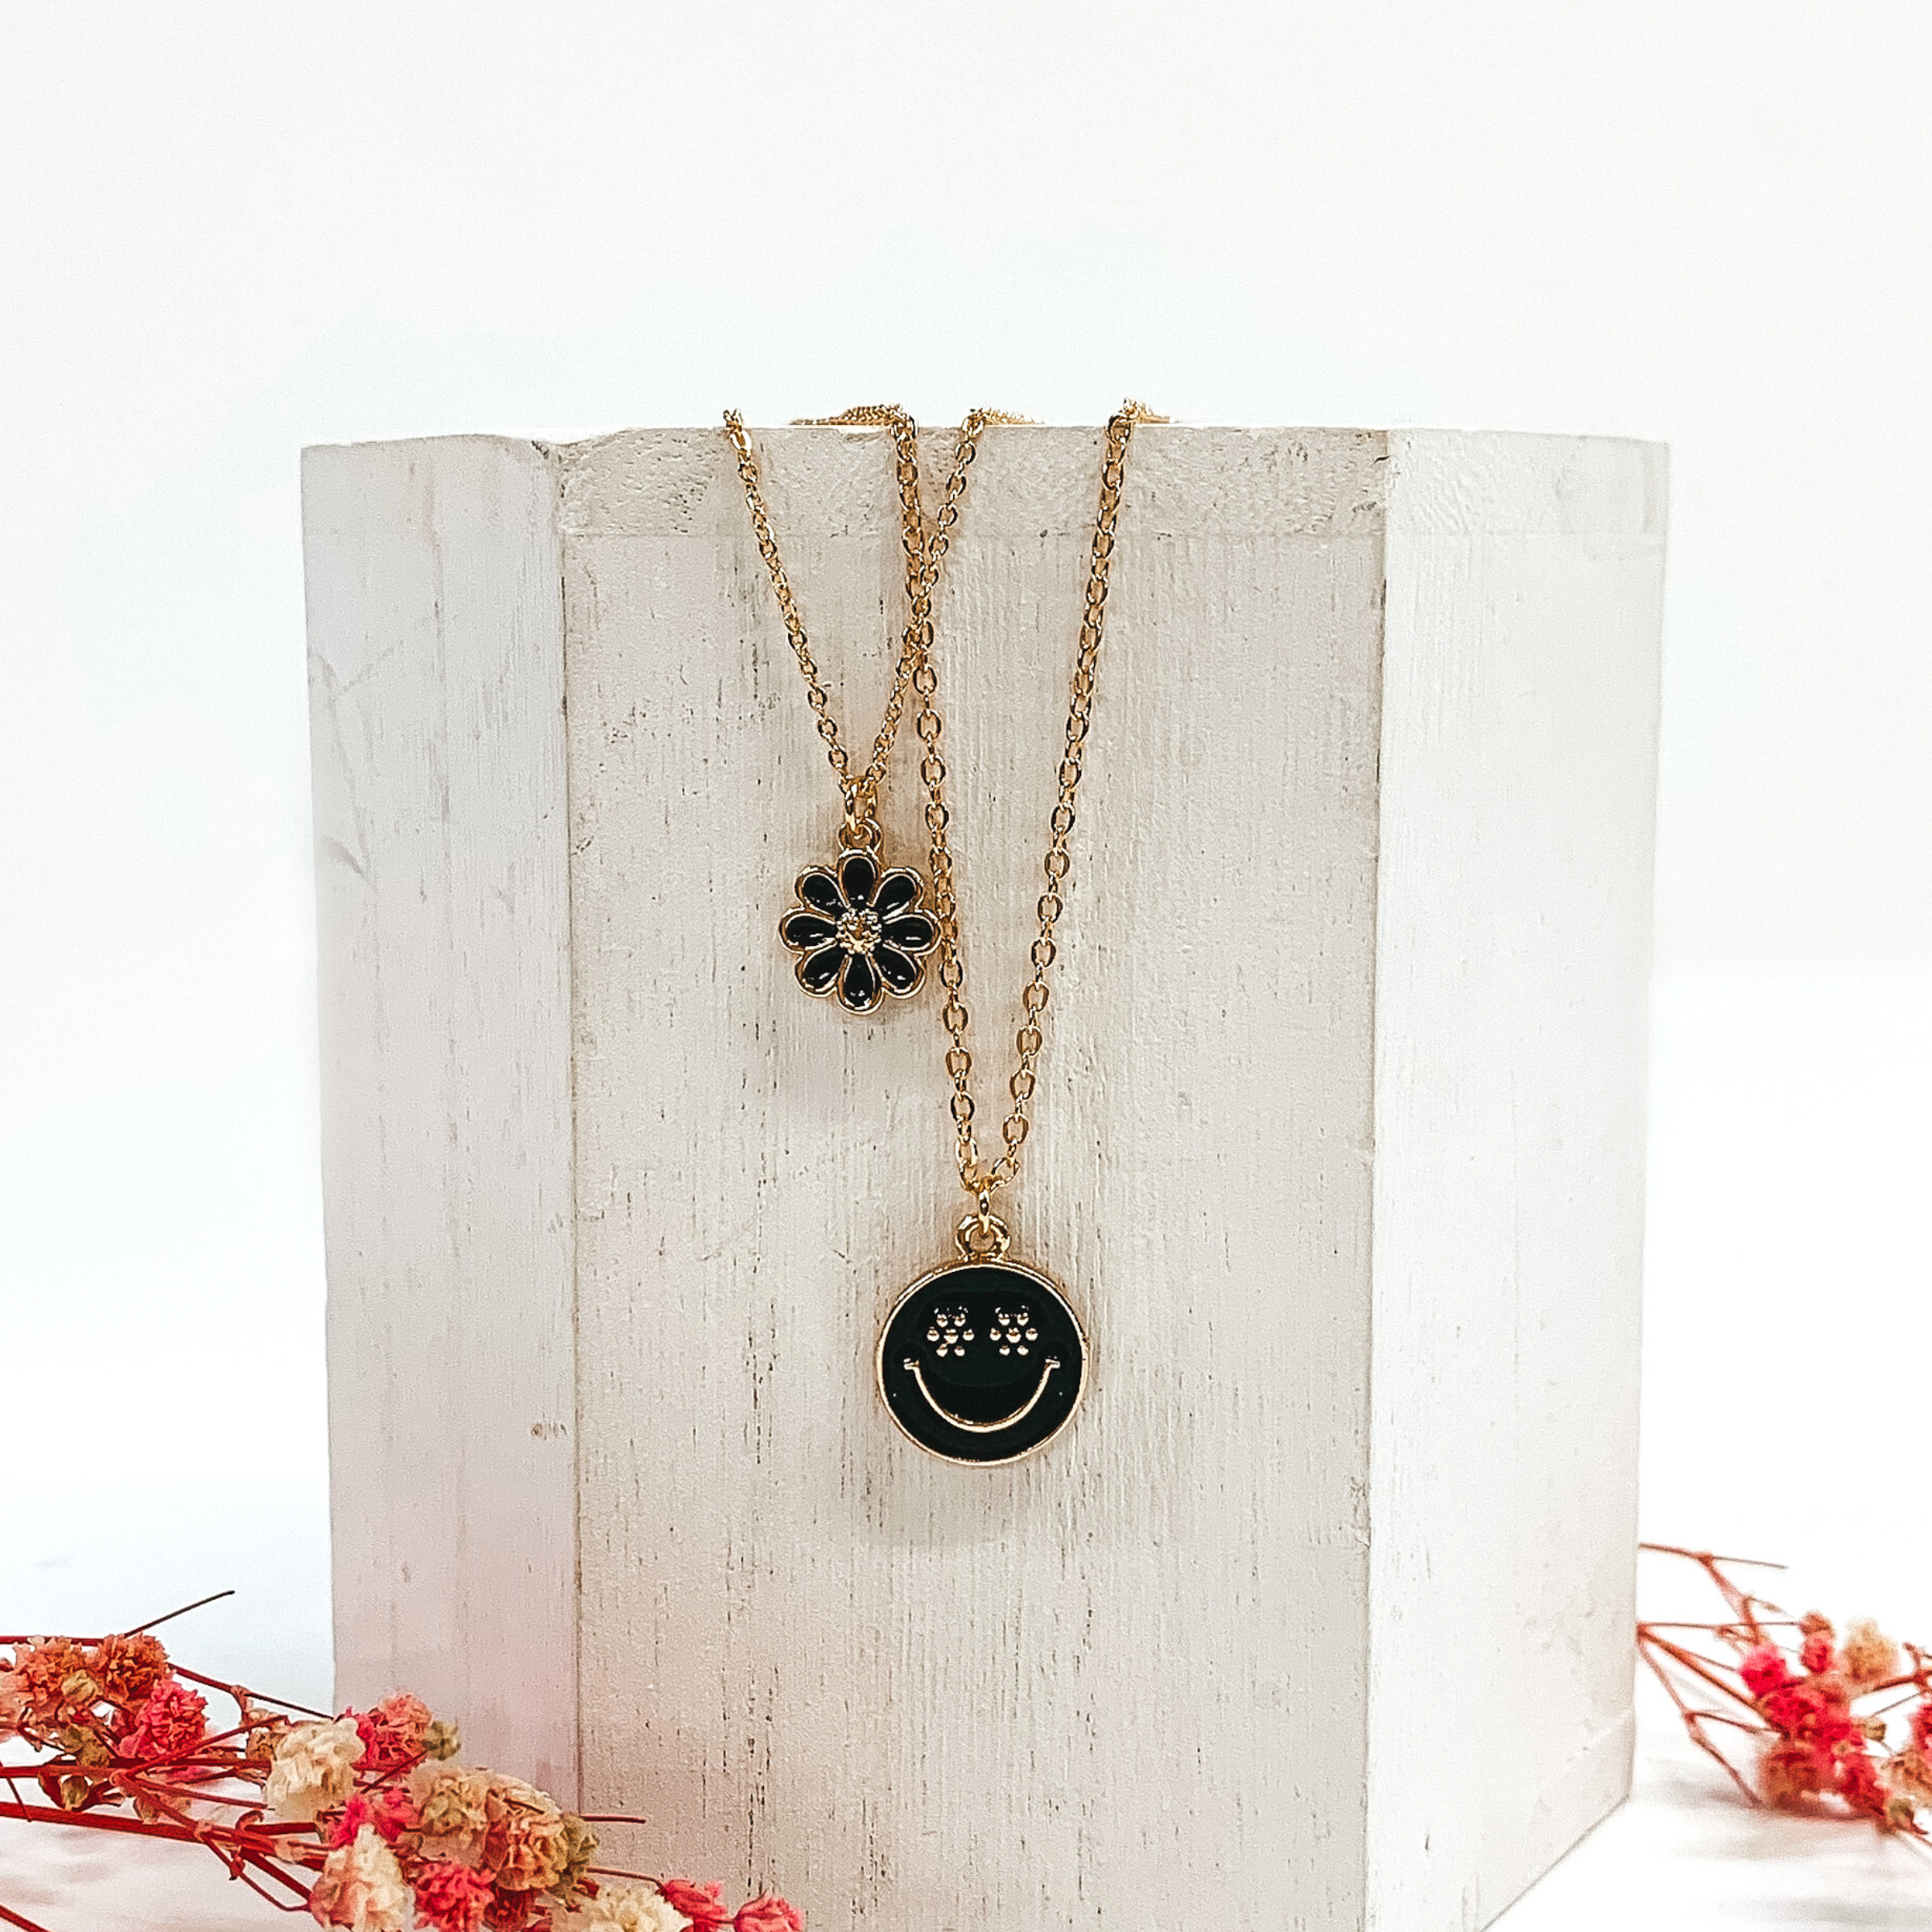 Gold double chained necklace. One strand has a black flower pendant and the other strand is longer and has a black circle pendant with a gold smiley face. This necklace is pictured laying on a white block on a white background with pink baby breath flowers at the bottom of the picture.